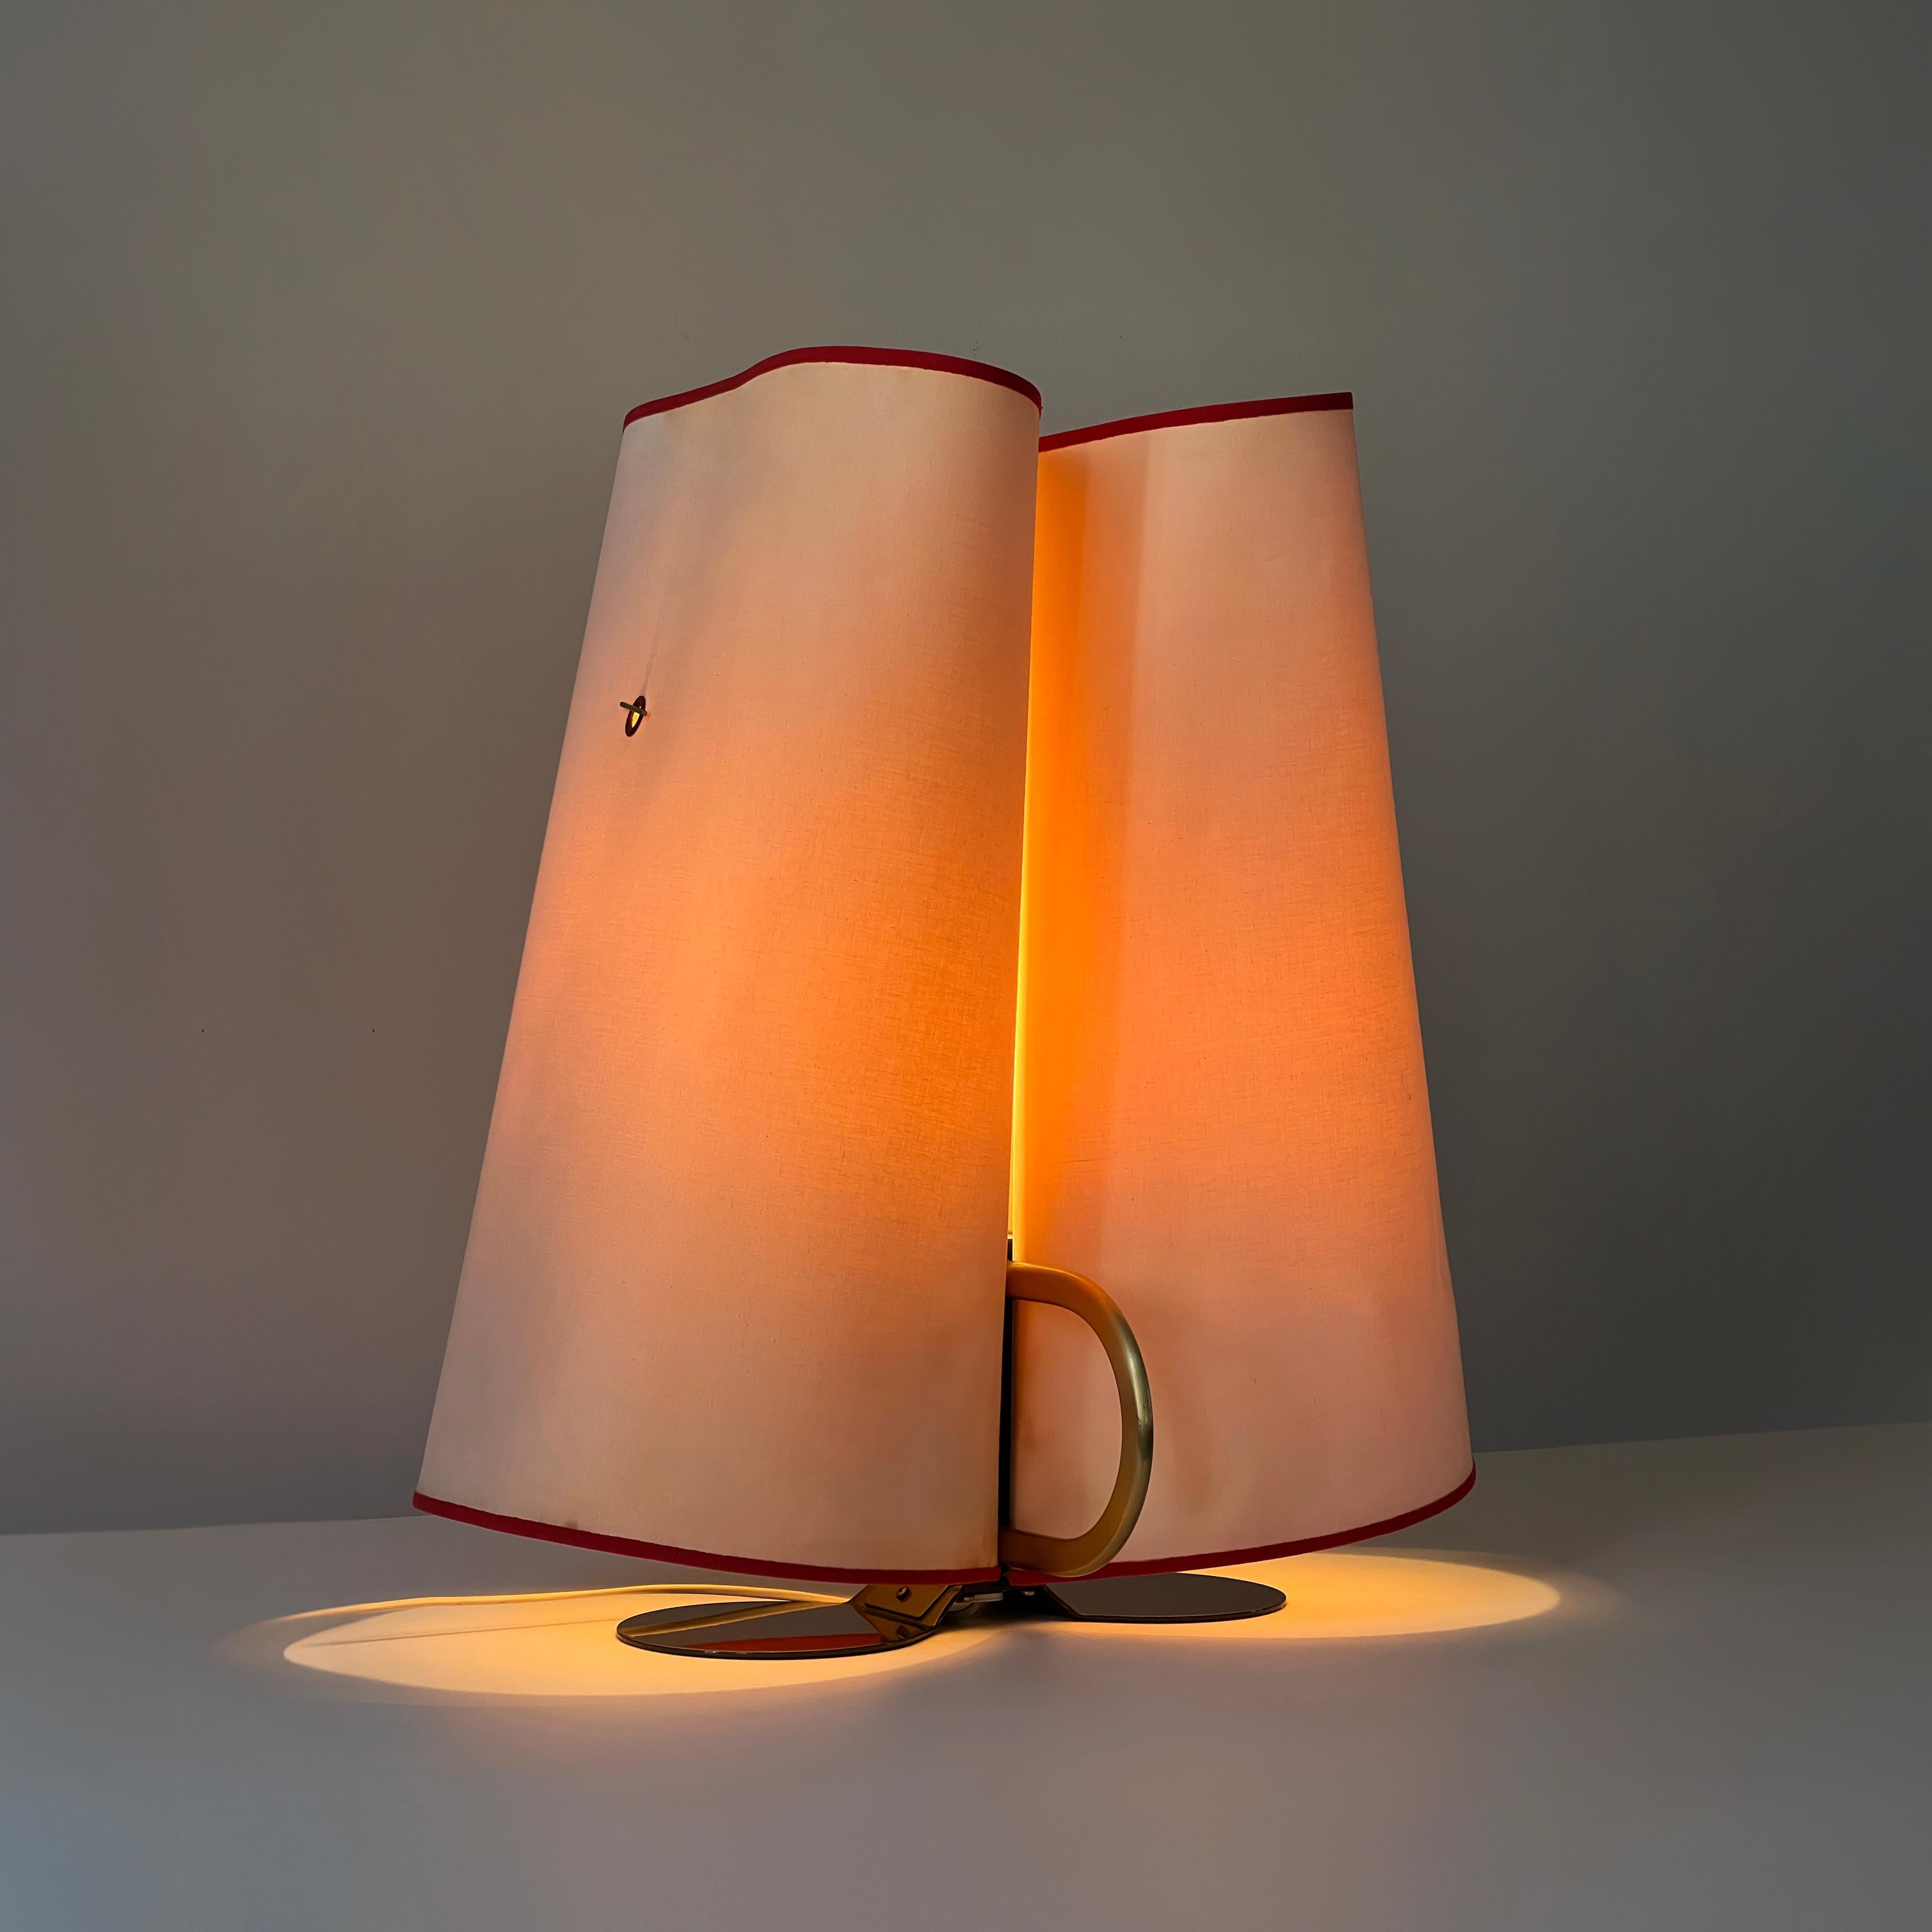 Metal Abatina table lamp designed by Afra & Tobia Scarpa for Flos, Italy 1980s